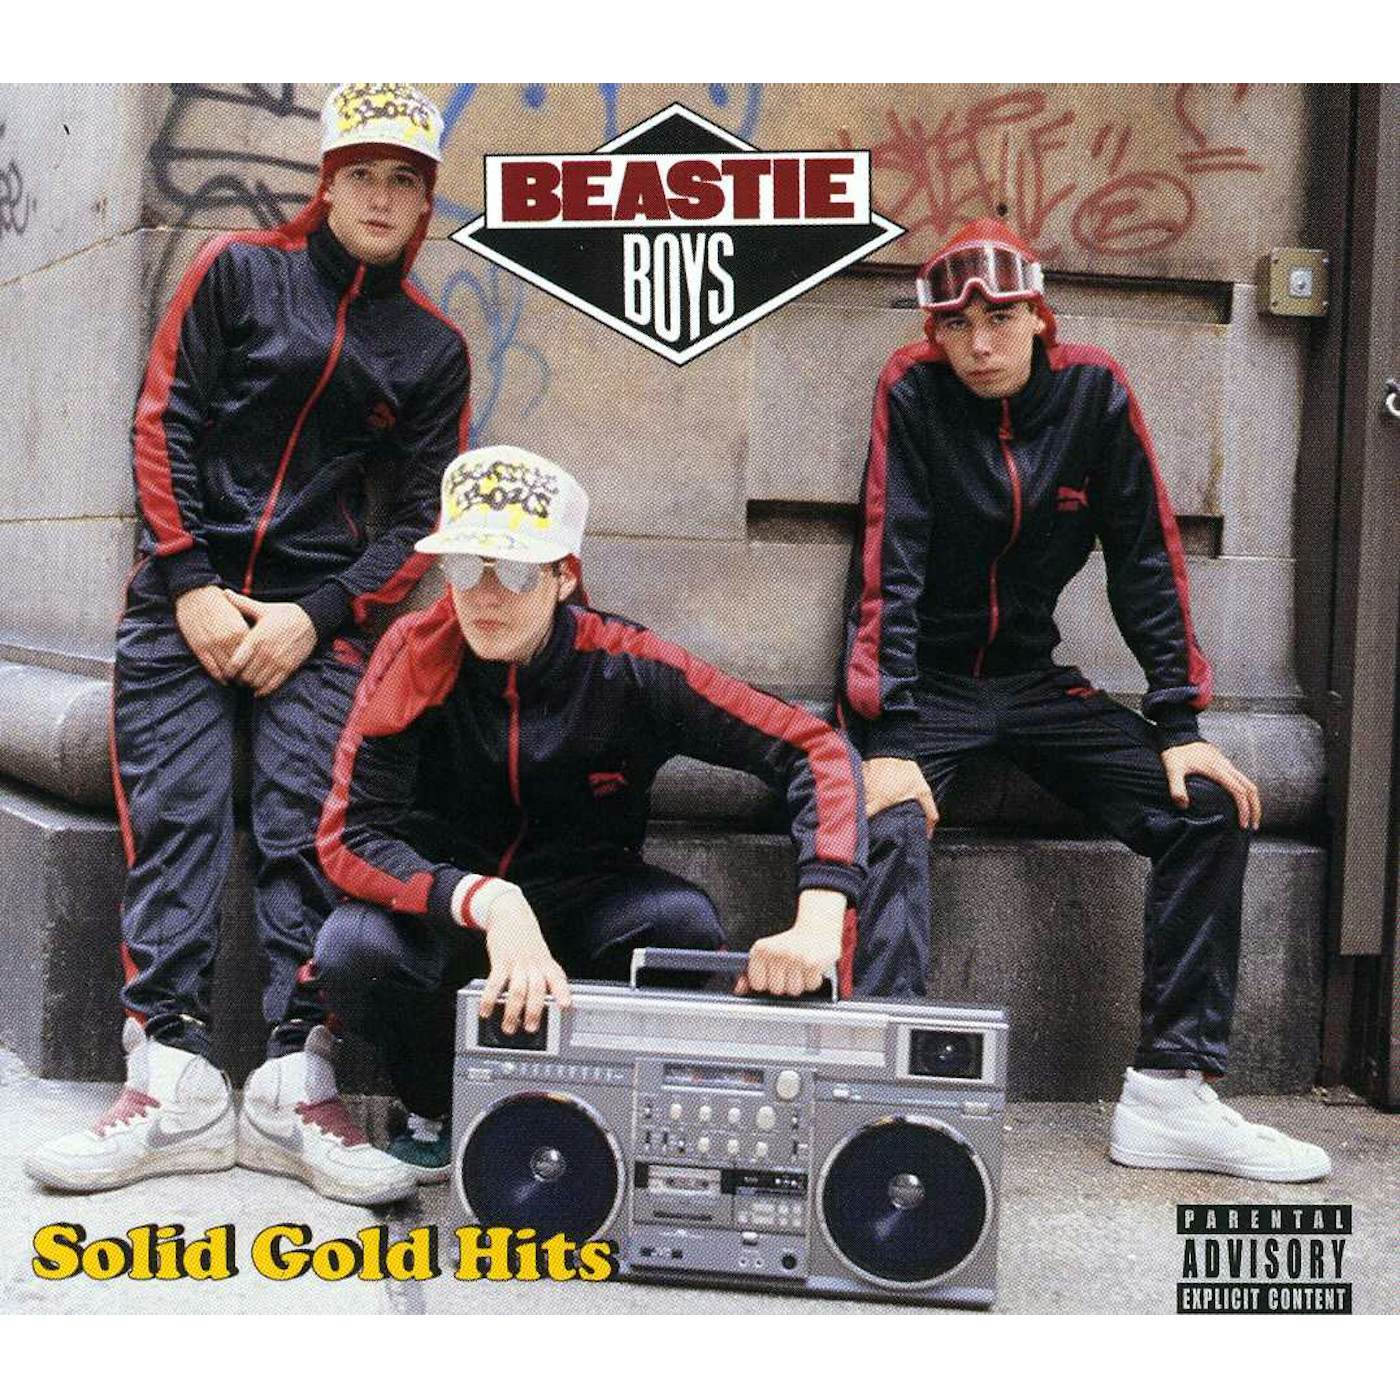 Beastie Boys SOLID GOLD HITS CD